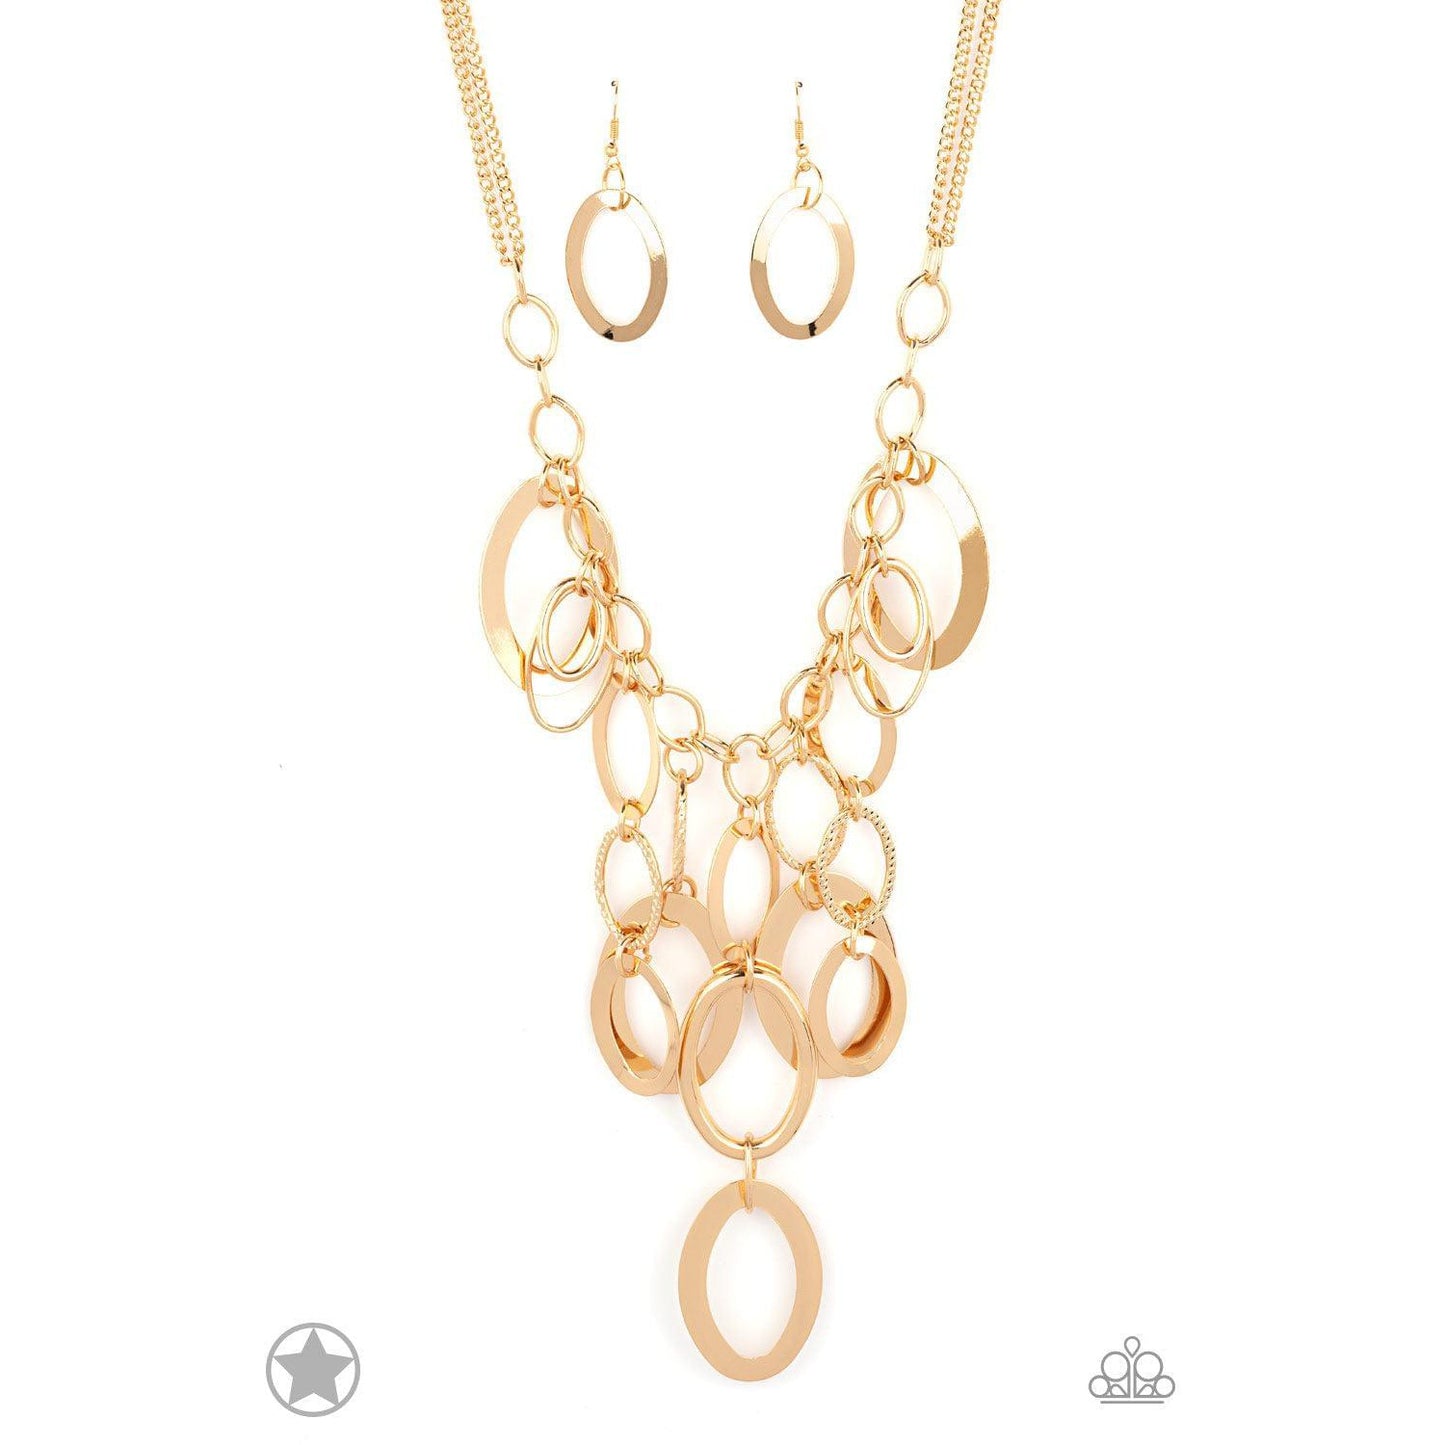 A Gold Spell - Gold Blockbuster Necklace - A Large Selection Hand-Chains And Jewelry On rainbowartsreview,Women's Jewelry | Necklaces, Earrings, Bracelets